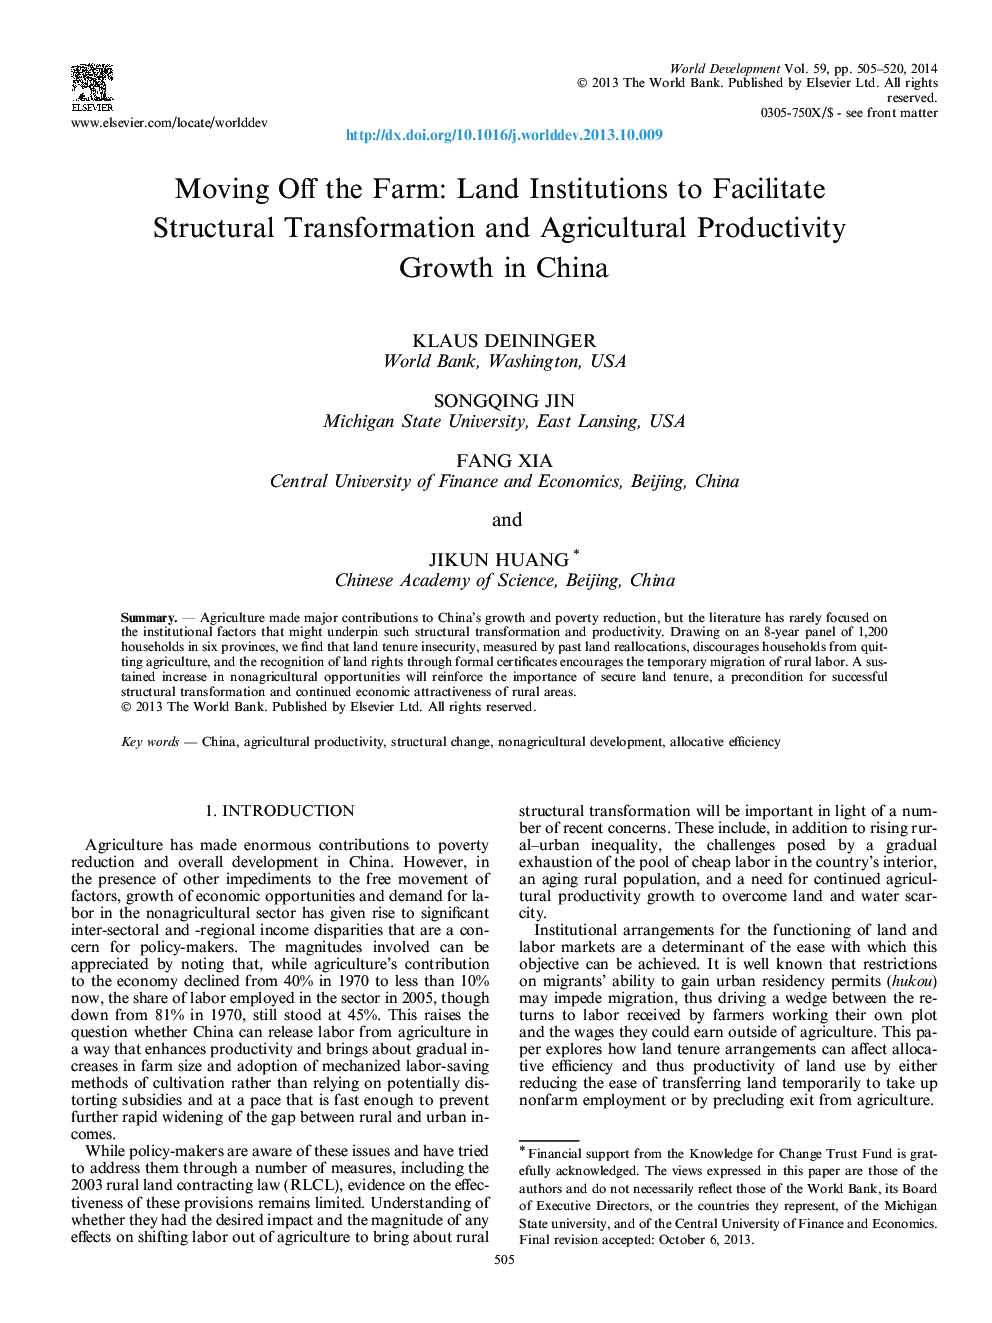 Moving Off the Farm: Land Institutions to Facilitate Structural Transformation and Agricultural Productivity Growth in China